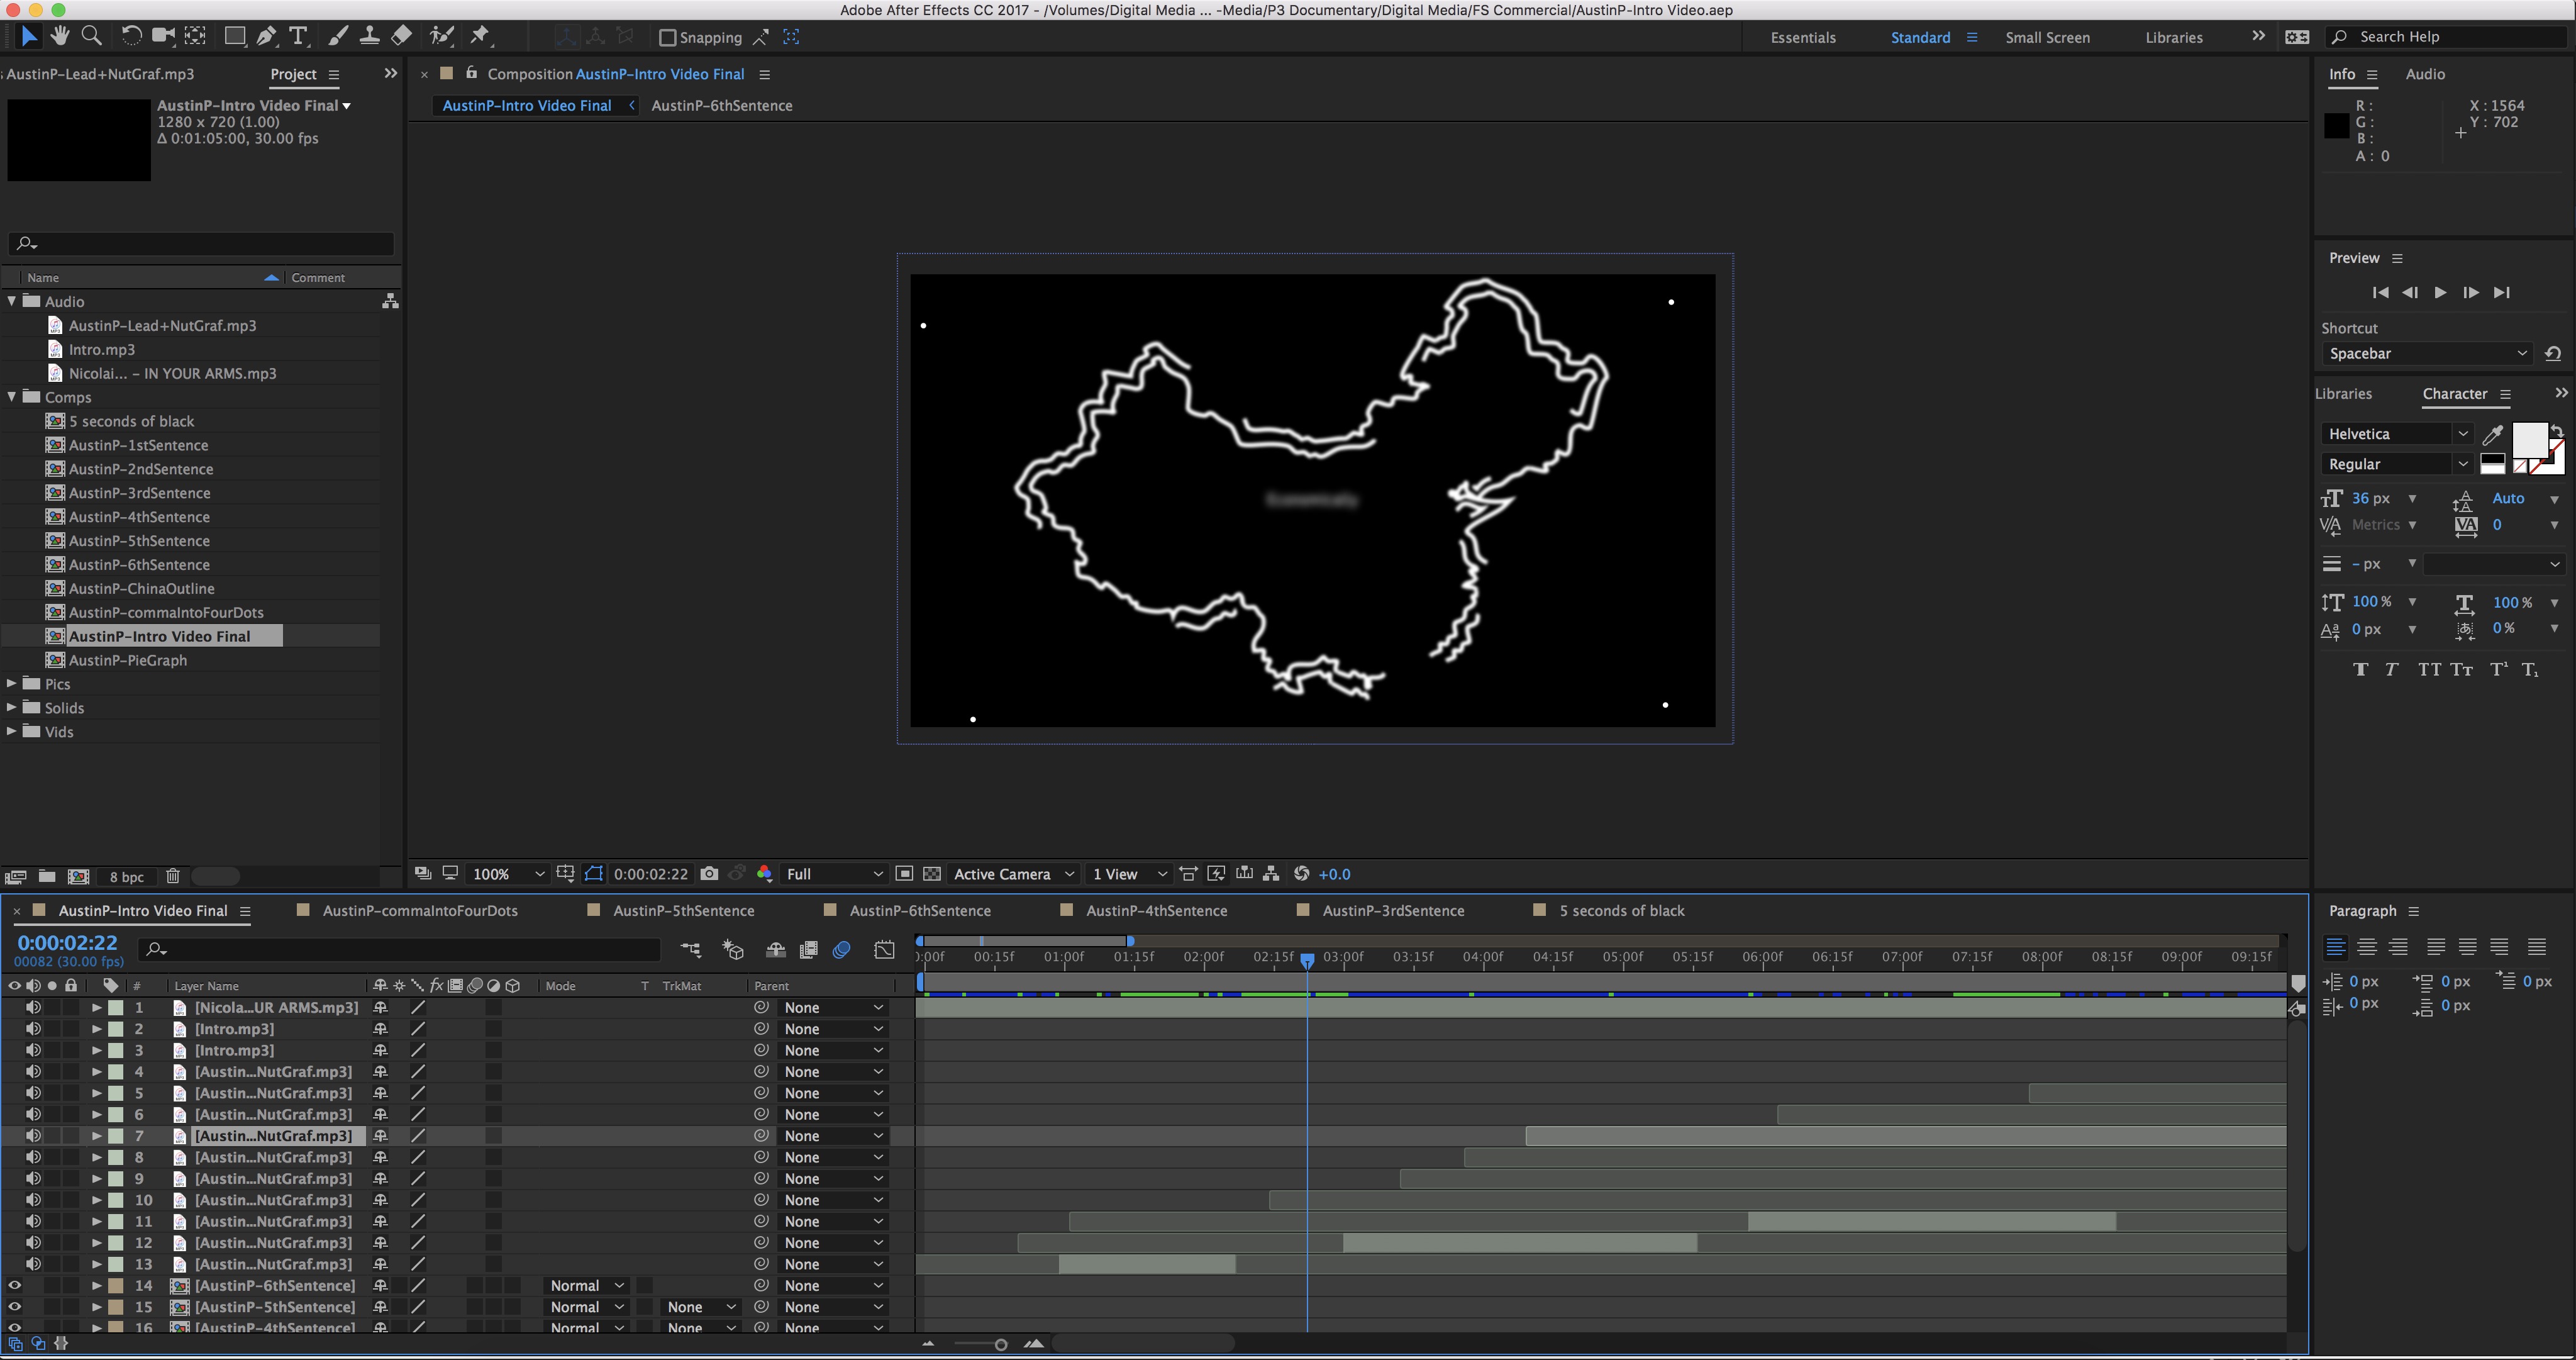 Screen Shot of My Adobe After Effects Workspace